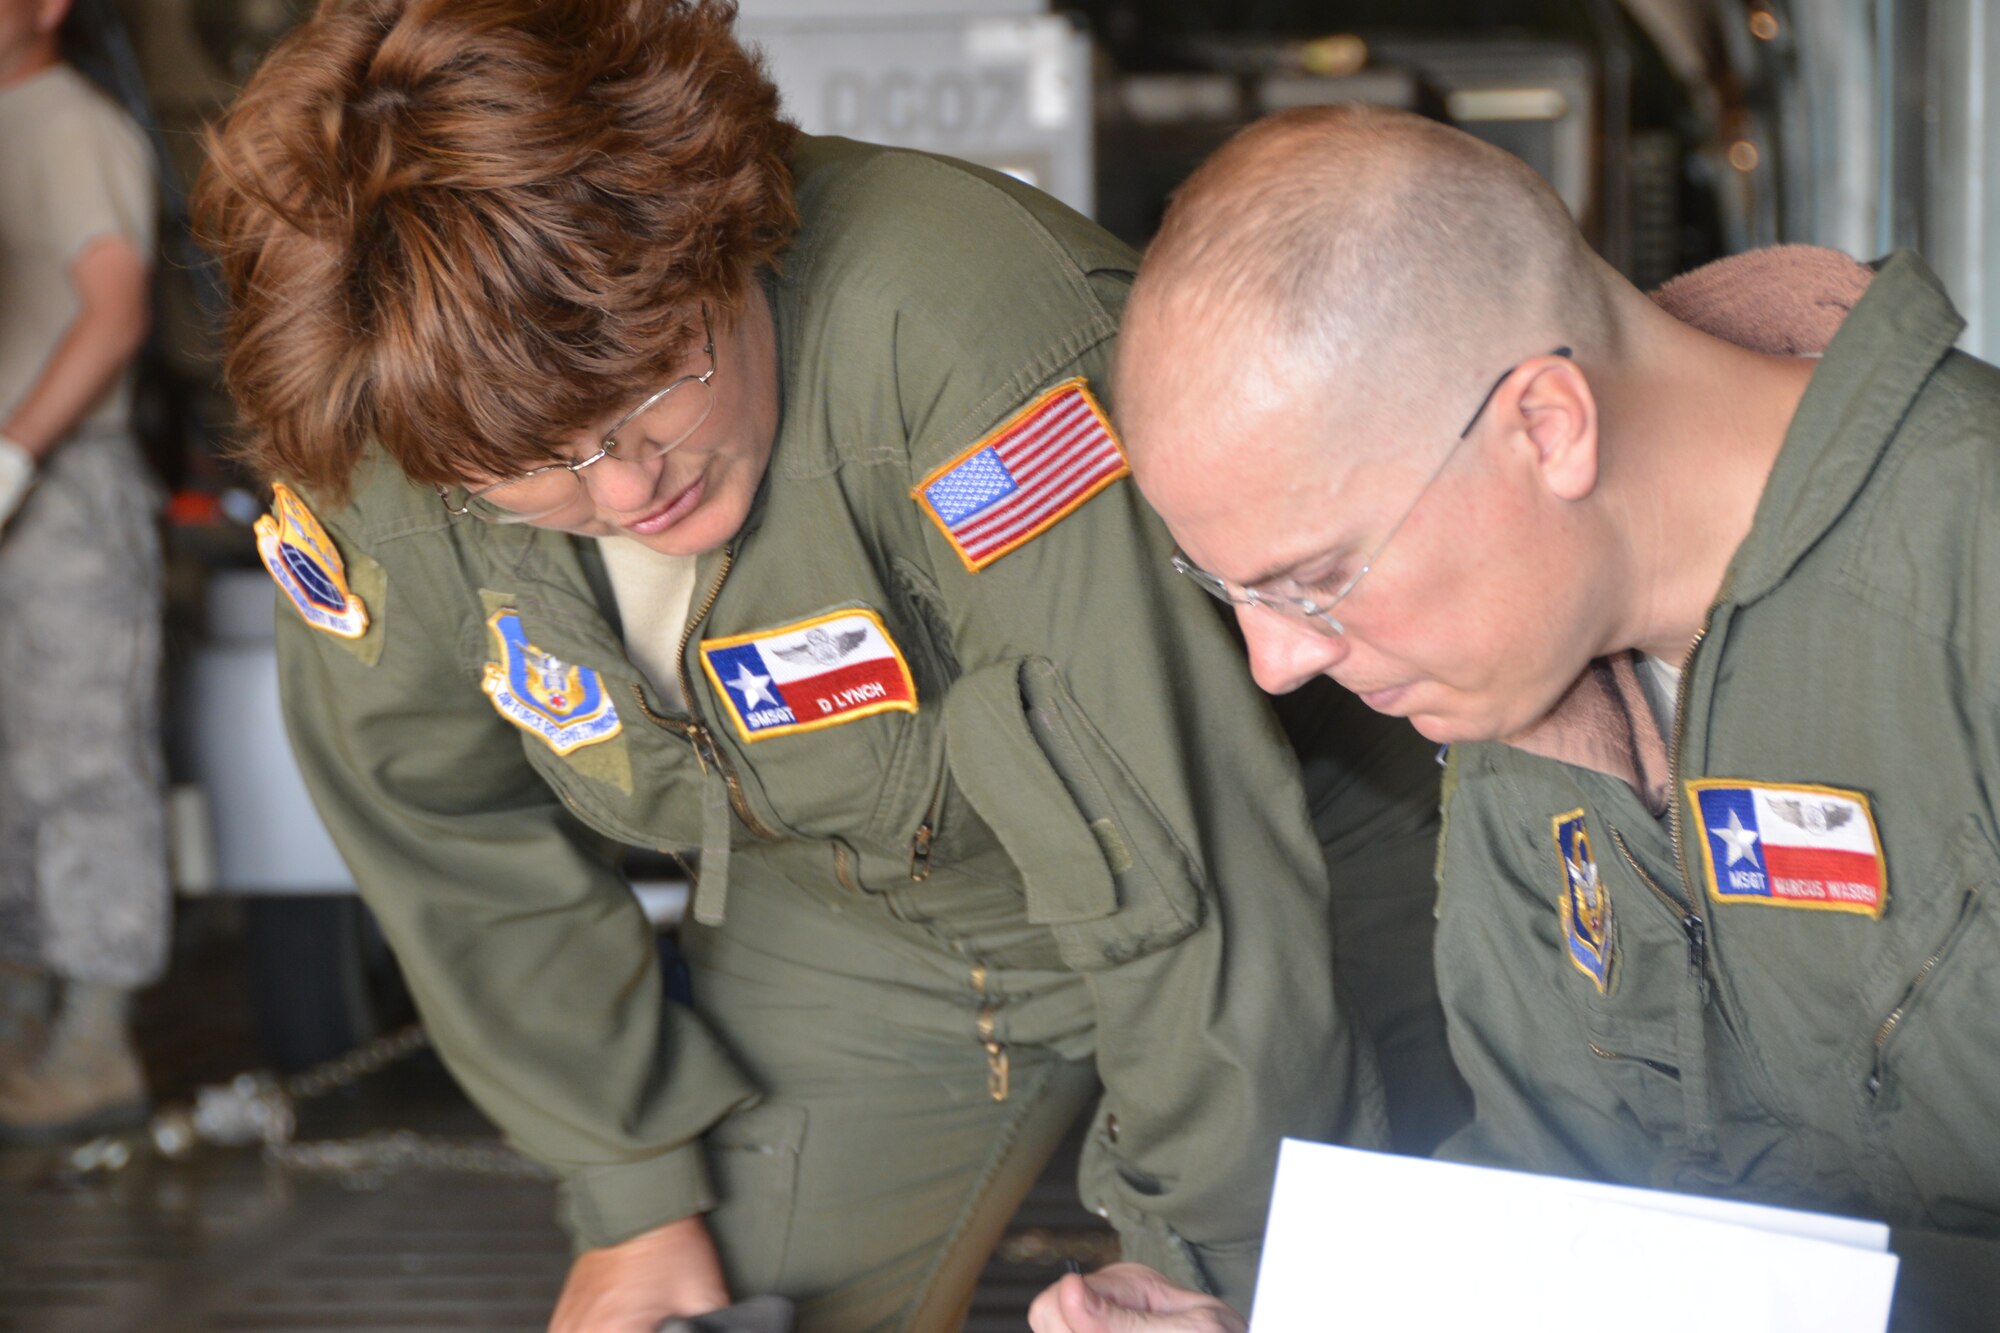 Loadmasters Senior Master Sgt. Denise Lynch, (left) 433rd Airlift Control Flight and Master Sgt. Marcus Wasden, 68th Airlift Squadron from Joint Base San Antonio-Lackland, Texas.  Review their load plan before departing JBSA-Lackland to Air Force Reserve Command’s Patriot Hook 2014 exercise at Naval Air Station, North Island, Calif., April 24, 2014. (U.S. Air Force photo/Senior Master Sgt. Minnie Jones)
